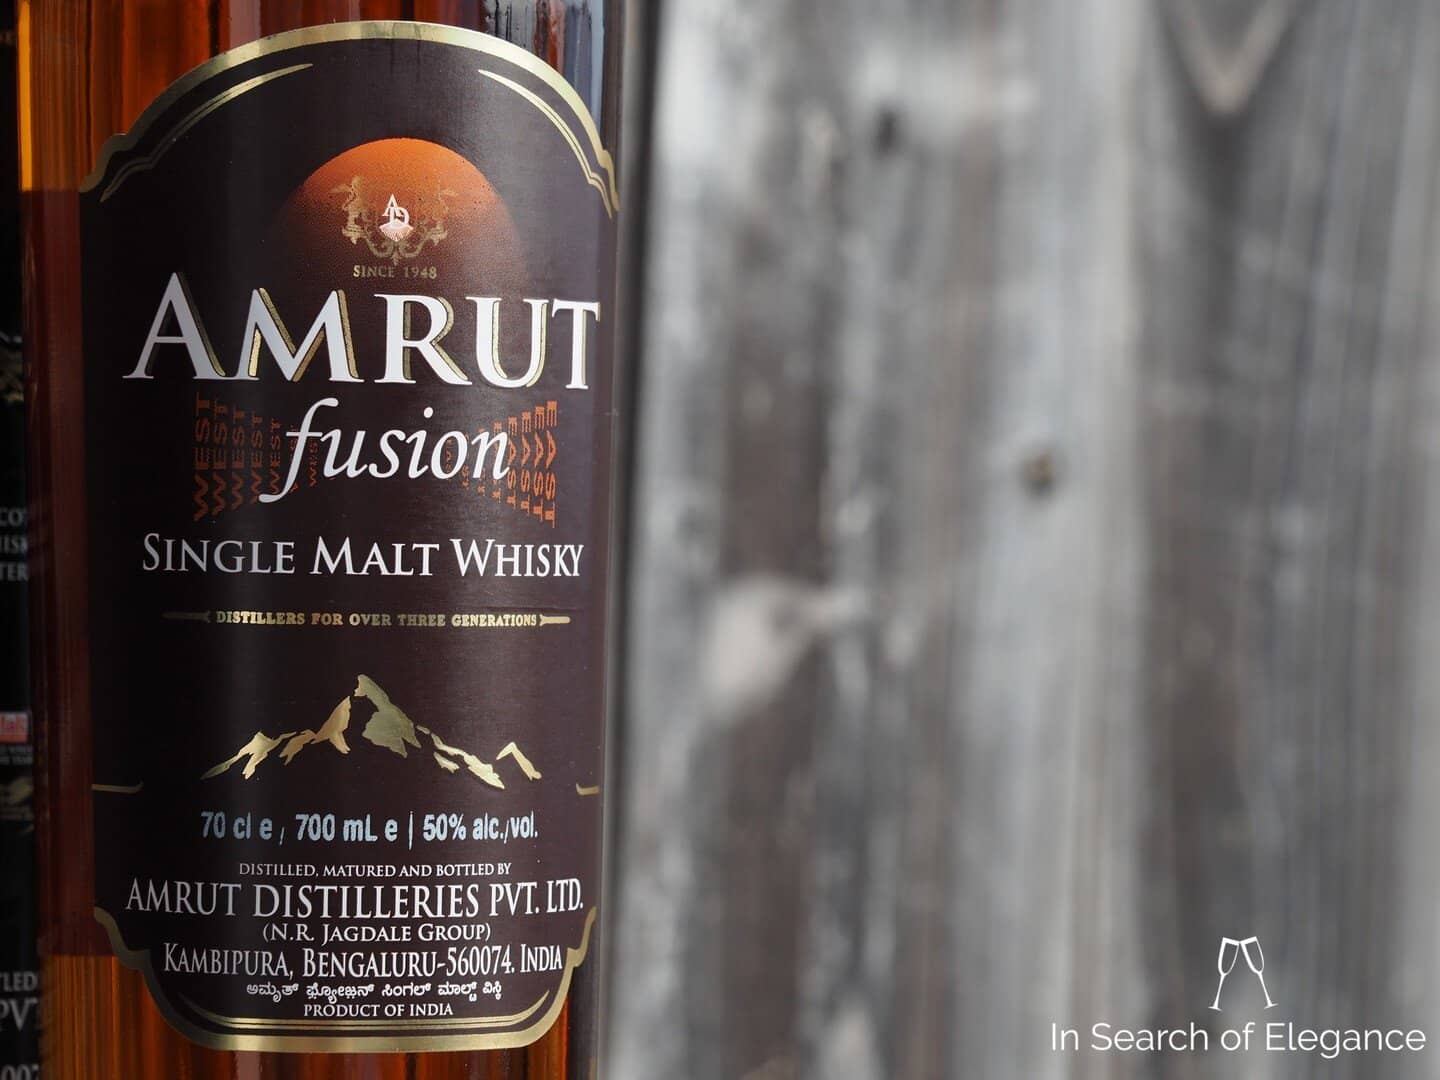 Bottle of one of the most famous indian whisky brands: Amrut